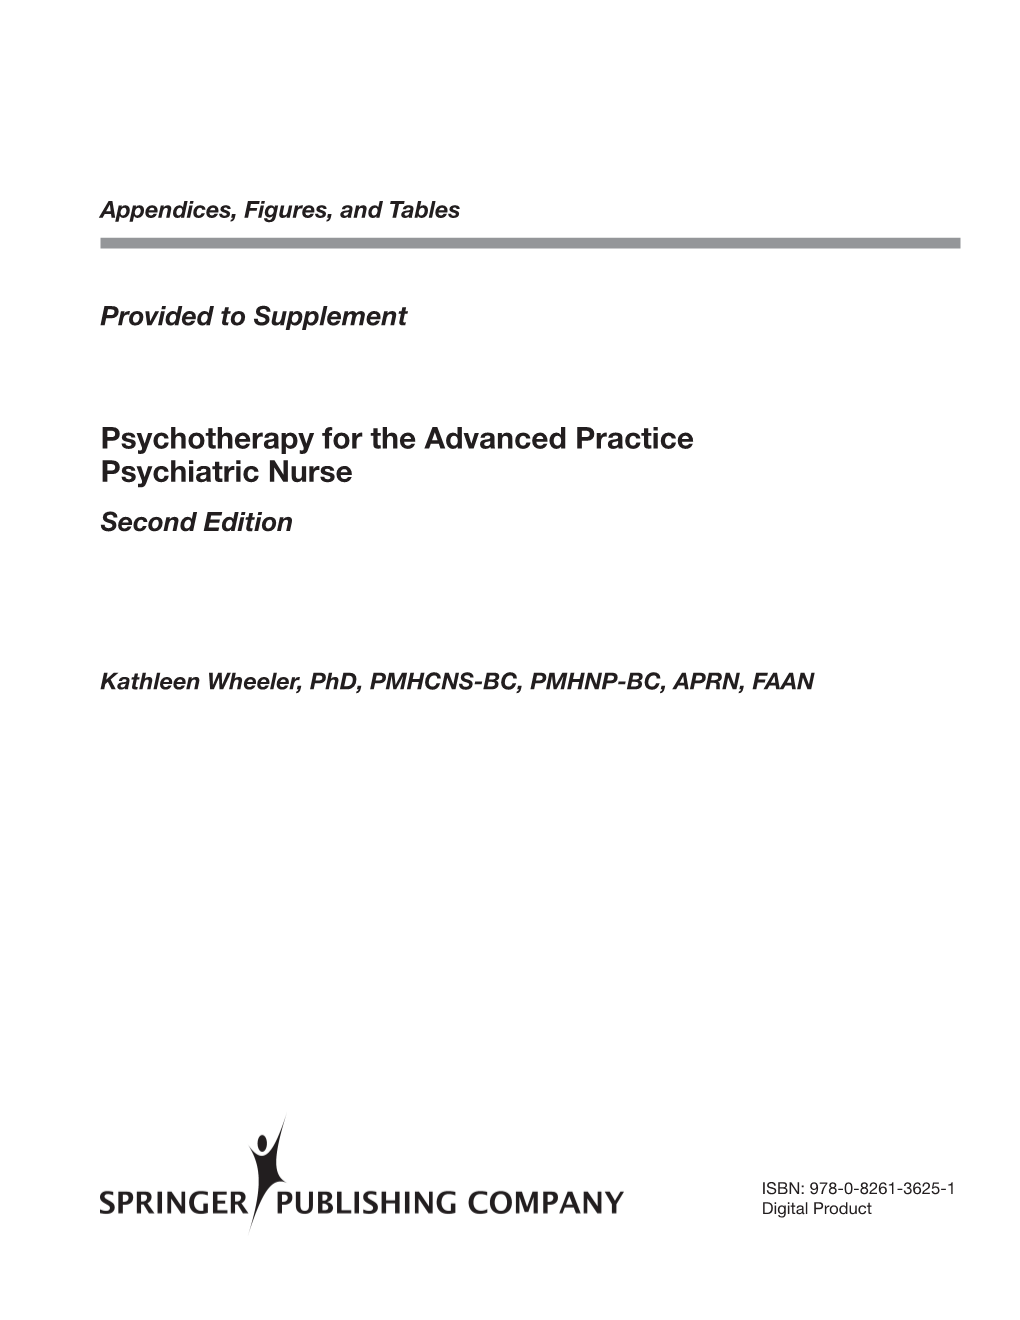 Psychotherapy for the Advanced Practice Psychiatric Nurse Second Edition